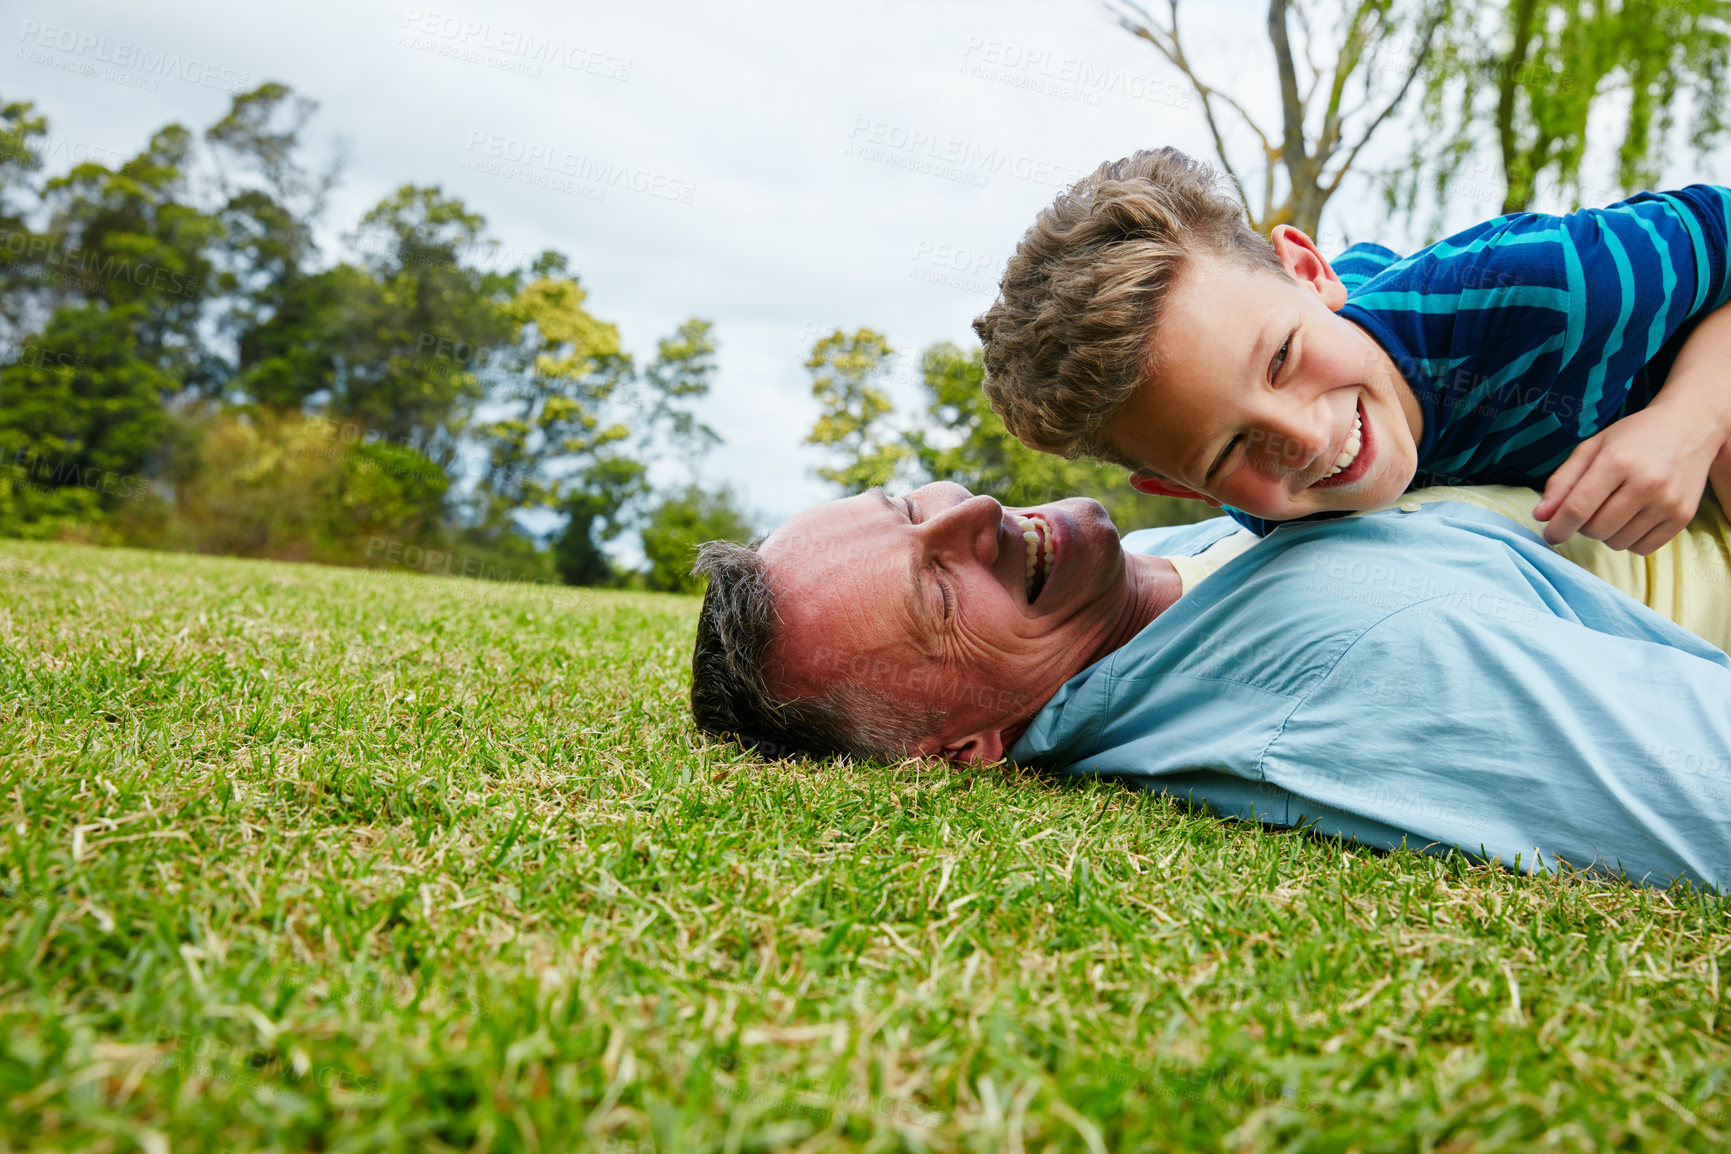 Buy stock photo Shot of a laughing father and son lying on grass